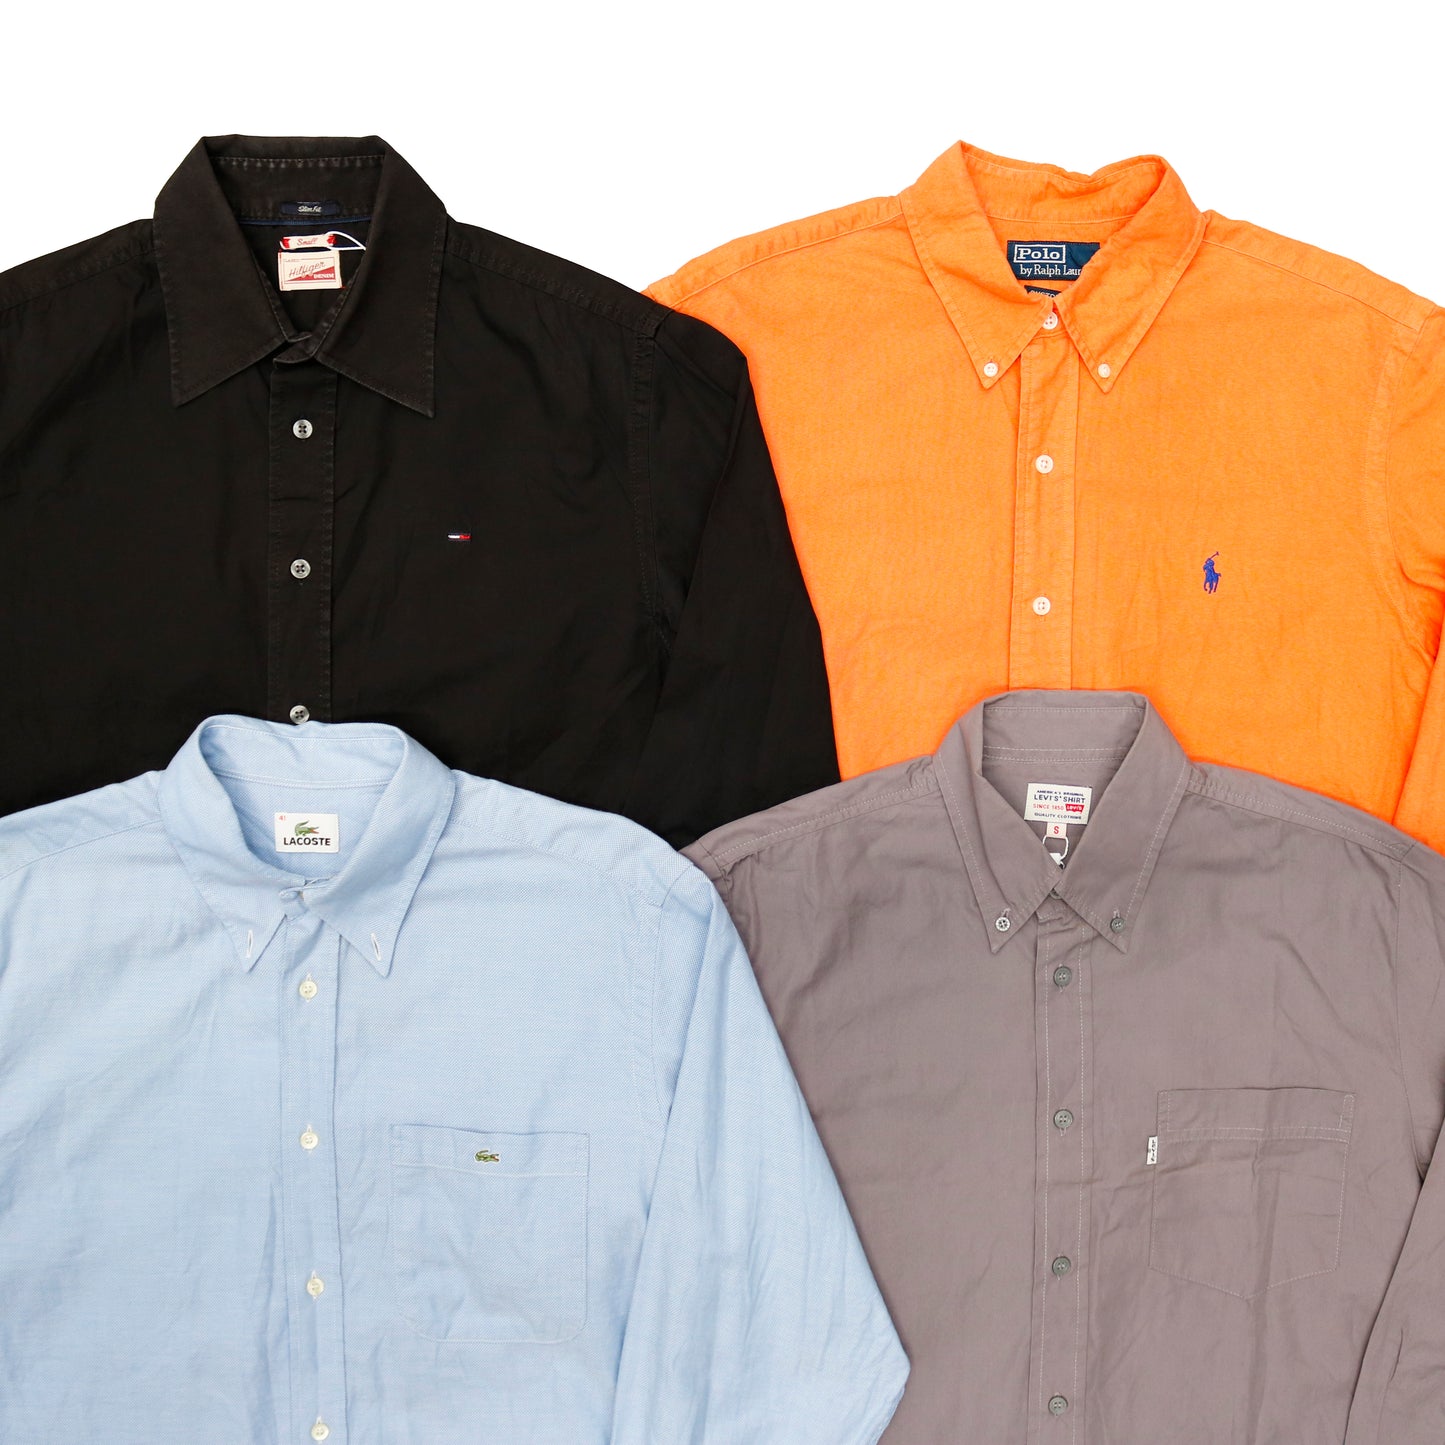 Best Selection of Assorted Branded Shirt